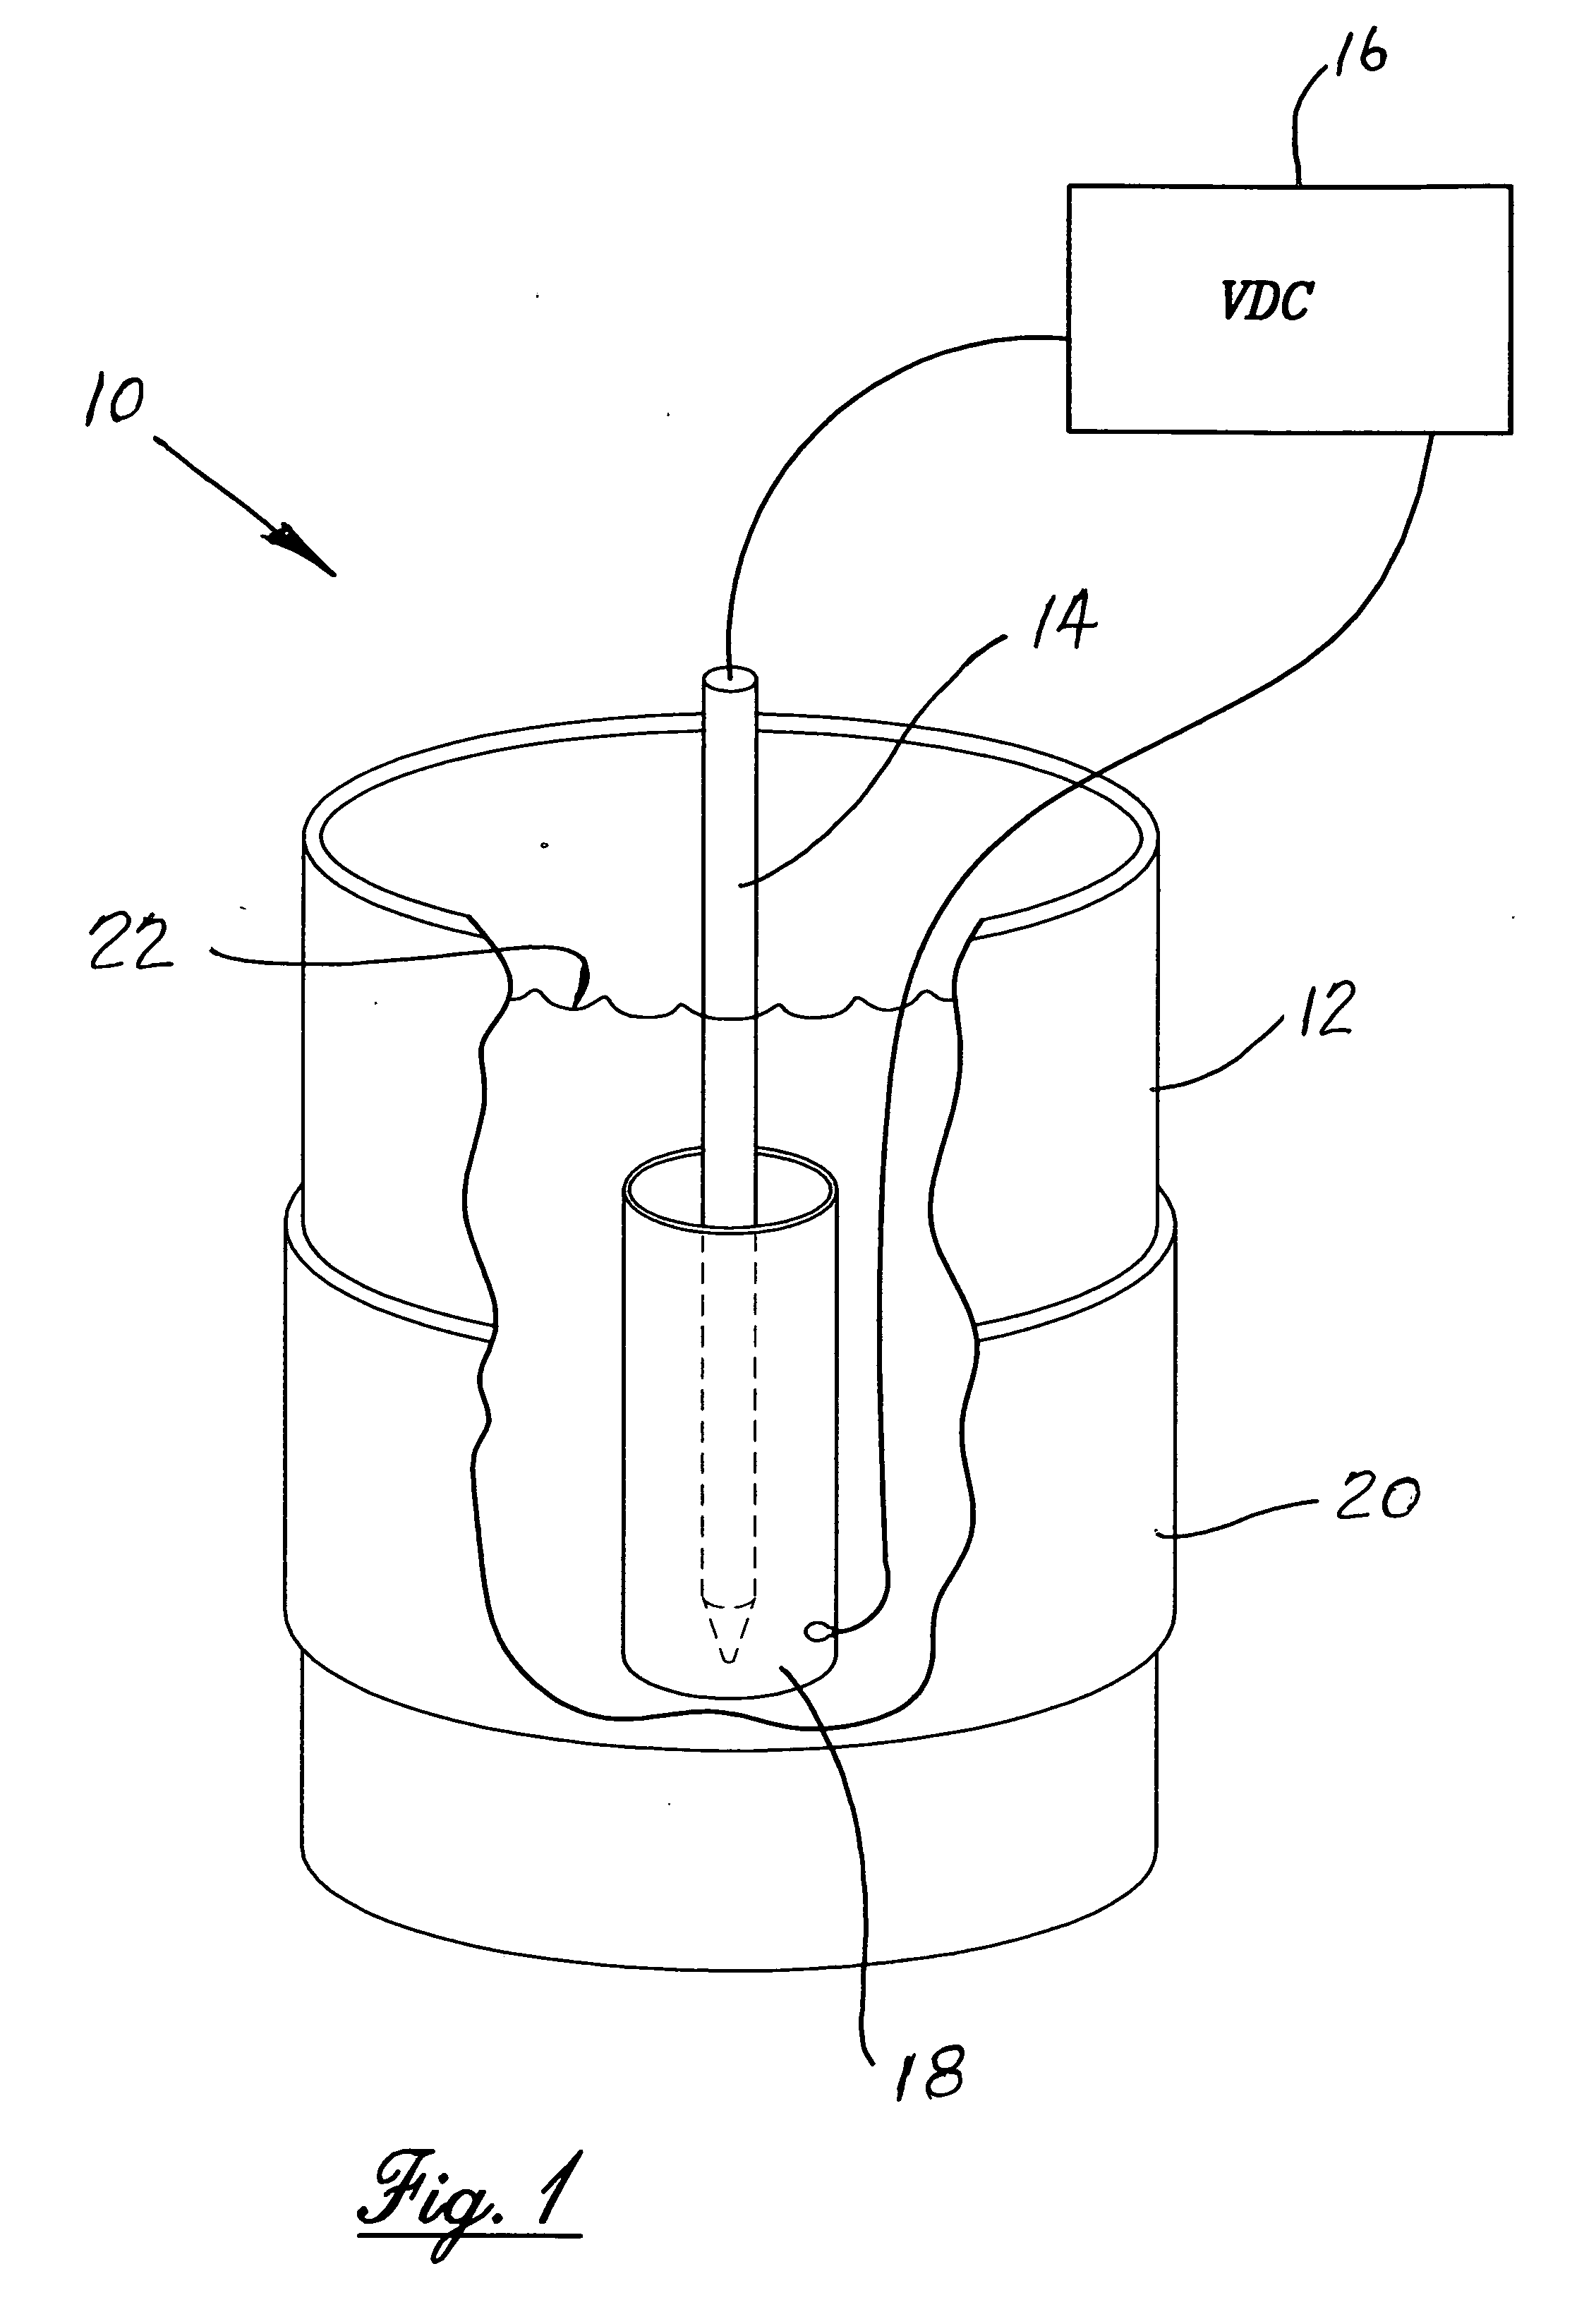 Apparatus and method for enhancing electropolishing utilizing magnetic fields